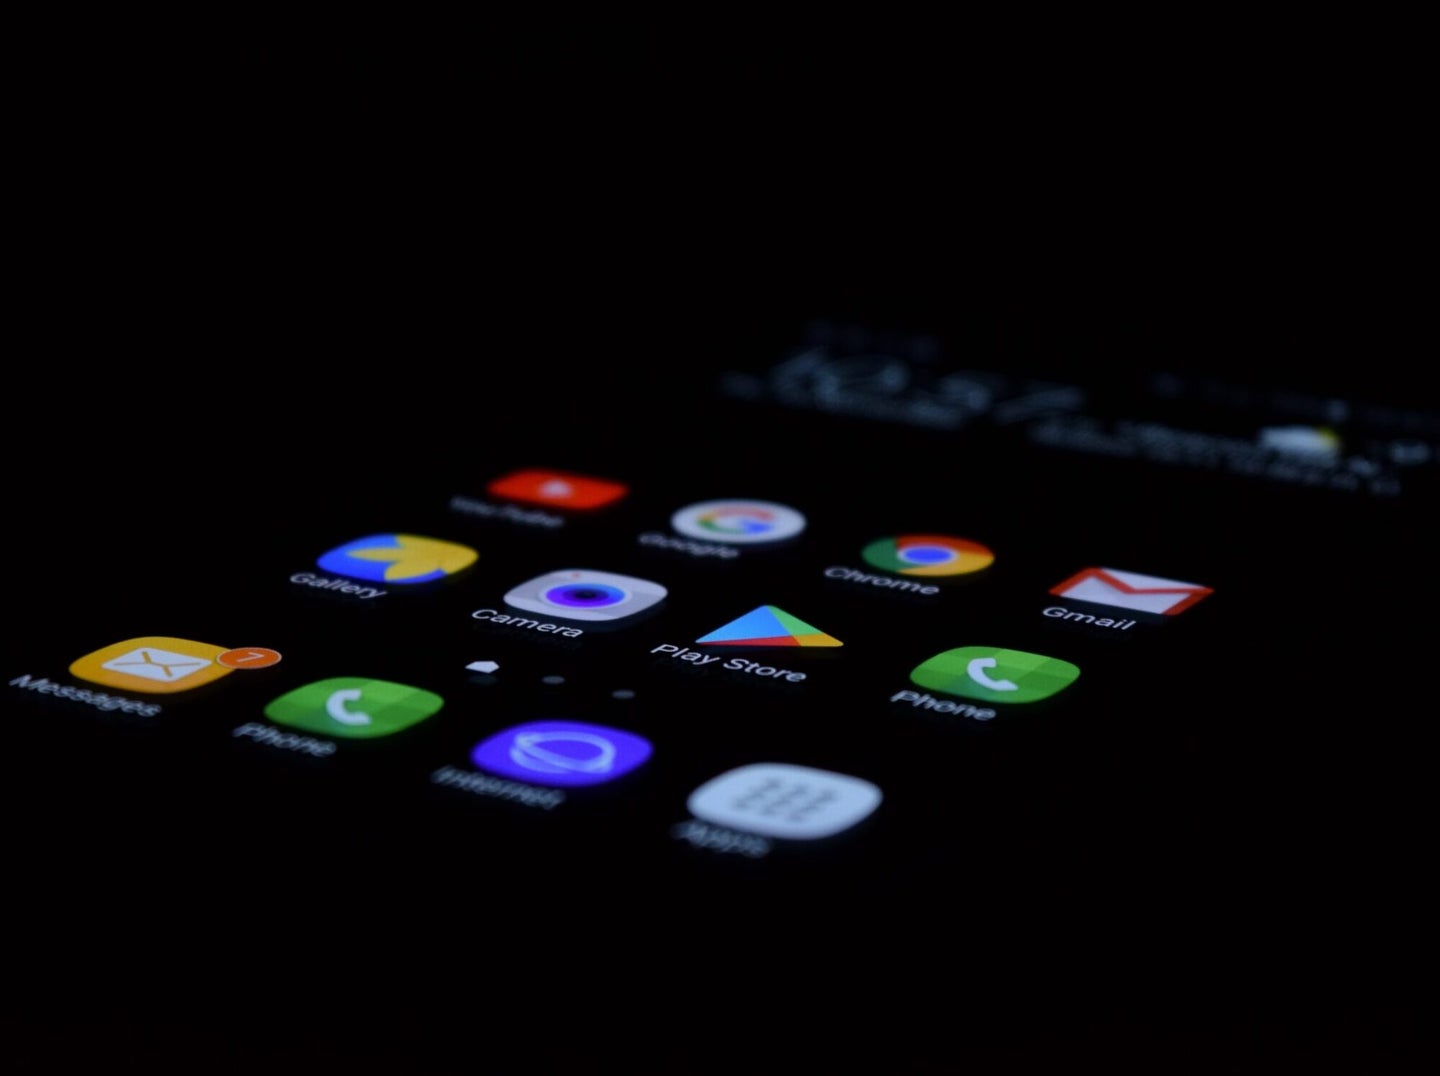 Backlit screen of smartphone home page displaying apps